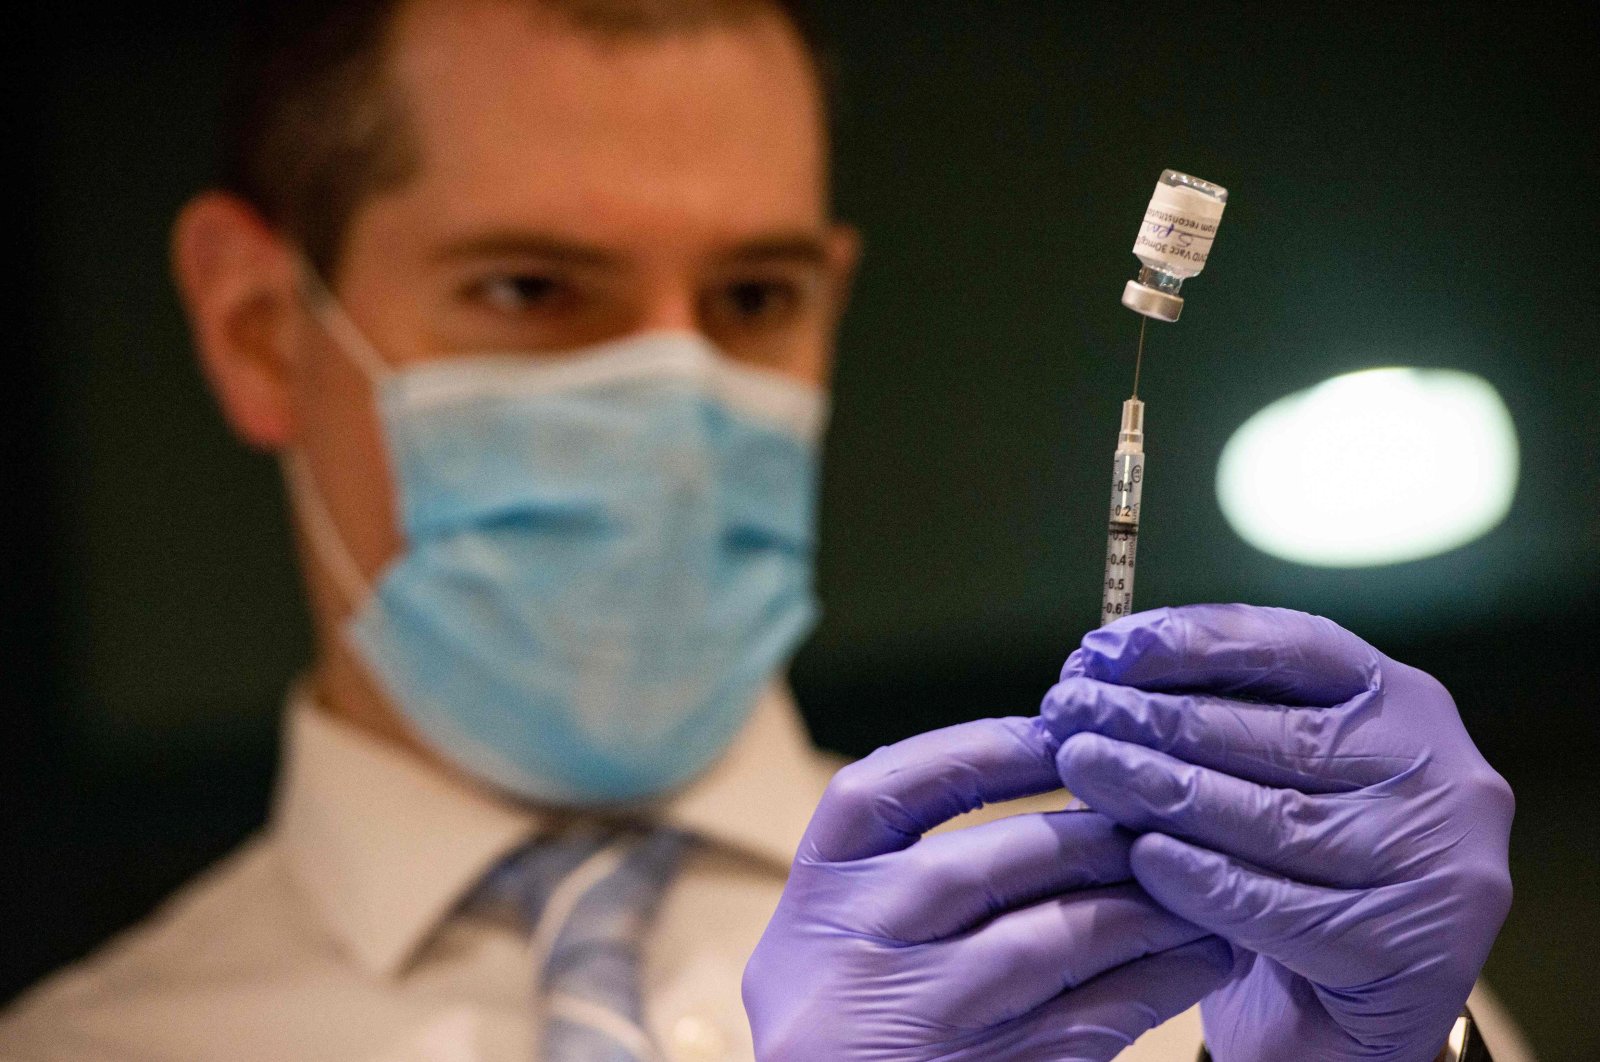 A medical worker fills syringes with the Pfizer-BioNTech COVID-19 vaccine at Foxwoods Resort and Casino in Mashantucket, Connecticut, U.S., March 8, 2021. (AFP Photo)